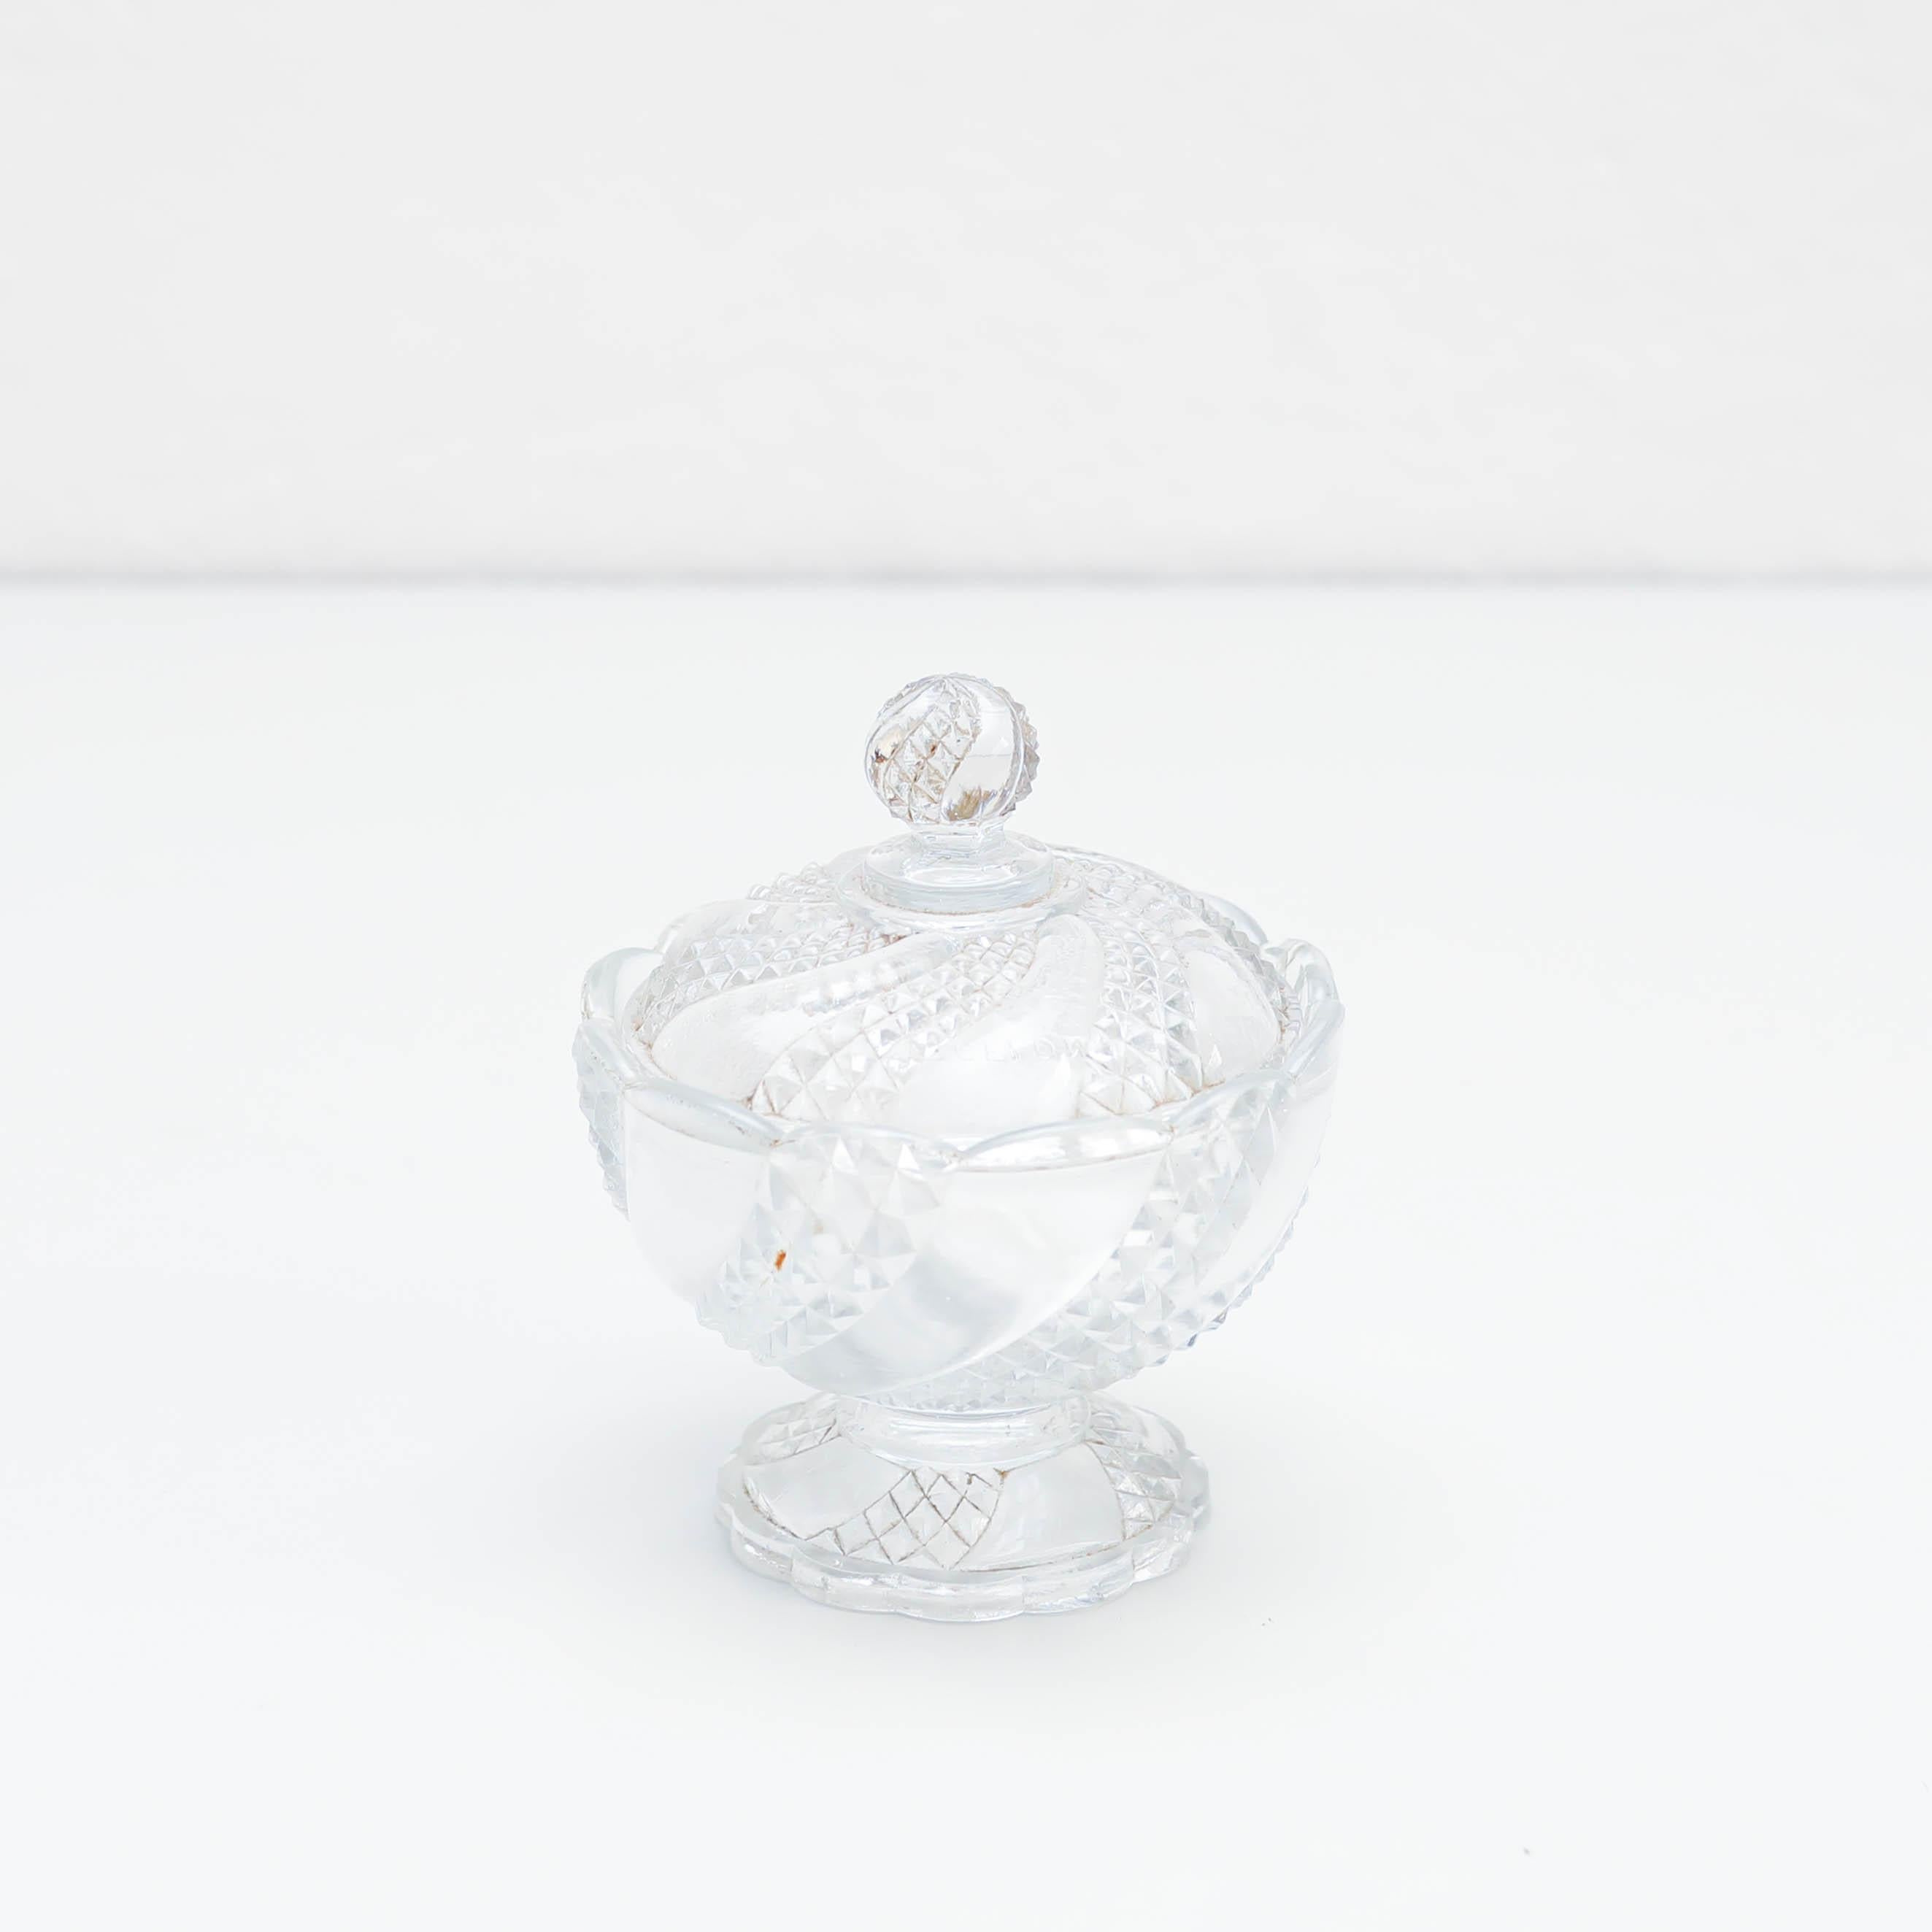 Crystal sugar bowl, circa 1920
Manufactured in Barcelona, Spain.

In original condition with wear consistent of age and use, preserving a beautiful patina.

Material:
Crystal

Dimensions:
H 15 cm x Ø 12 cm.
 